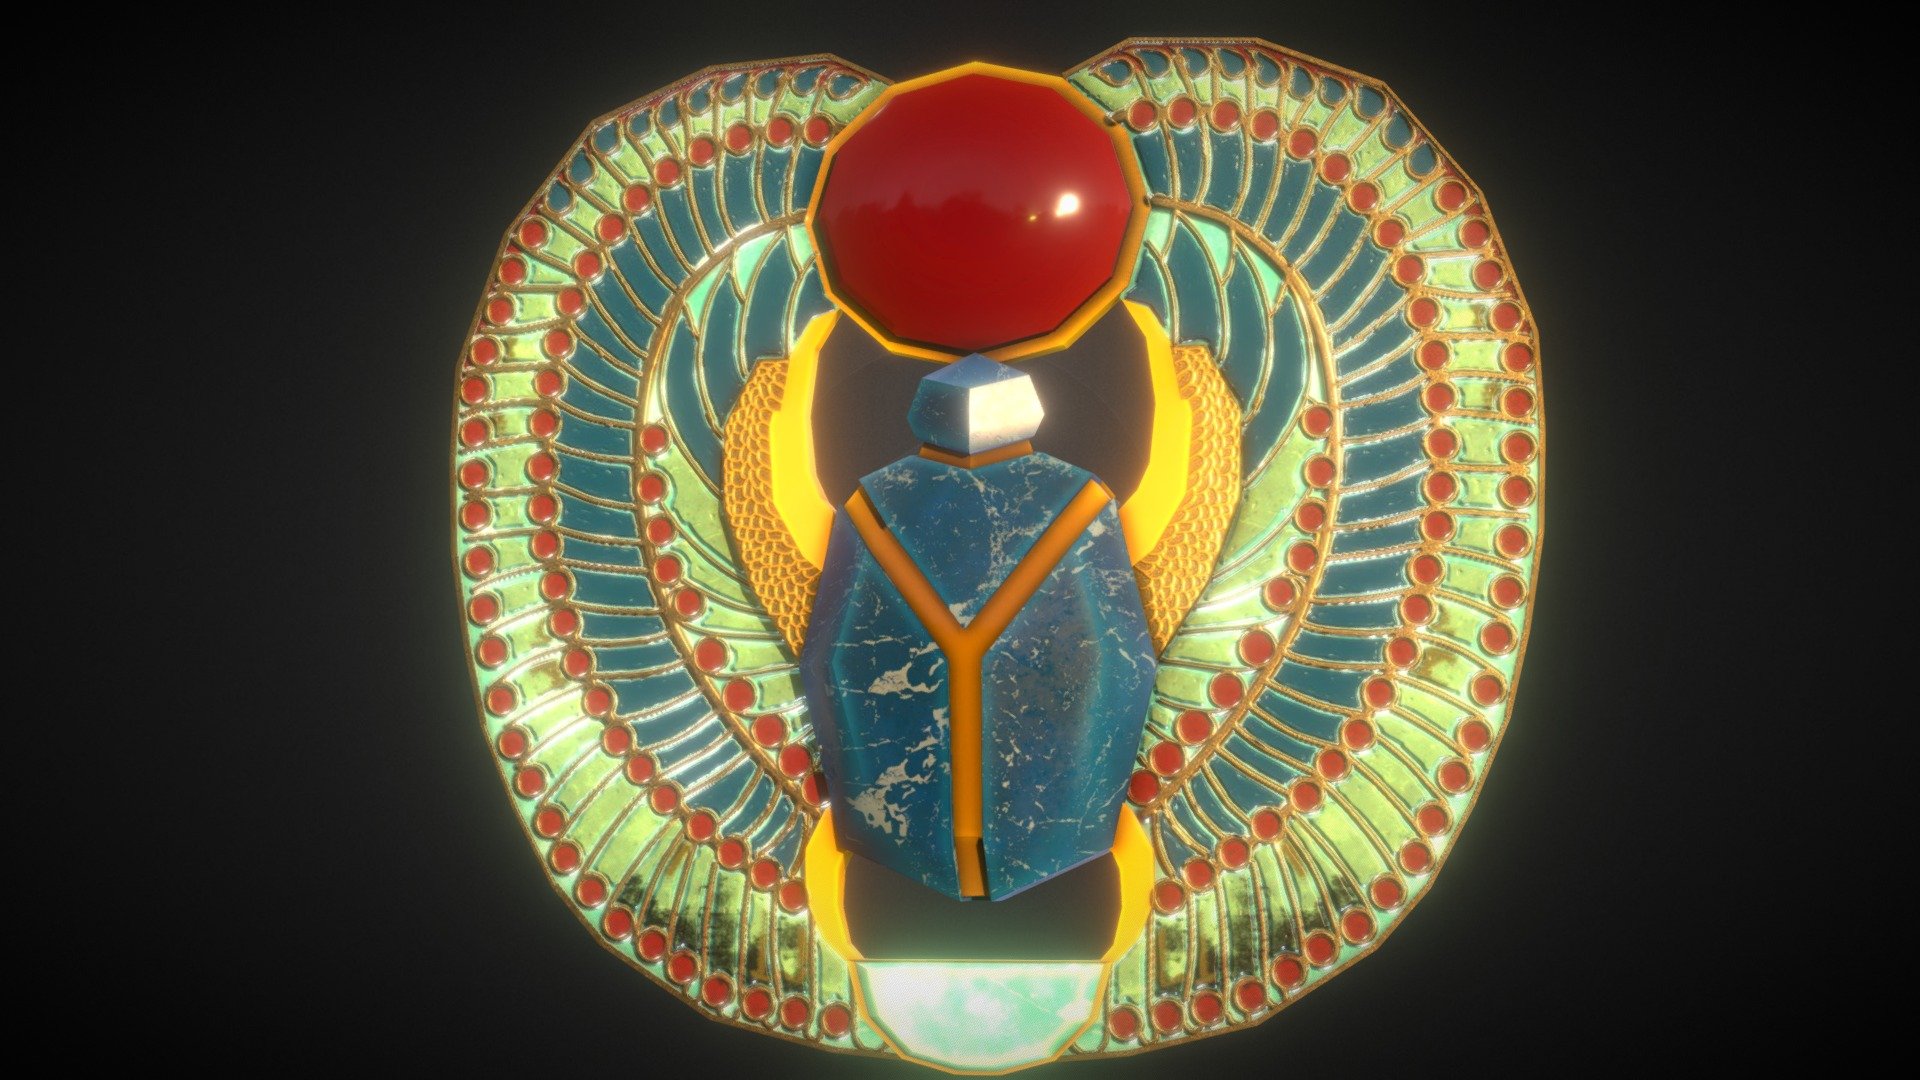 low-poly ancient egyptian jewelry for game and other uses. Pectoral Scarab of King.

The Scarab Pectoral was found in Tutankhamun's tomb along with hundreds of other pieces of jewellery. He probably wore it during his lifetime, hung from a gold chain around his neck. It shows a scarab beetle with a sun on top and a bowl on the bottom, and a pair of bird's wings 3d model